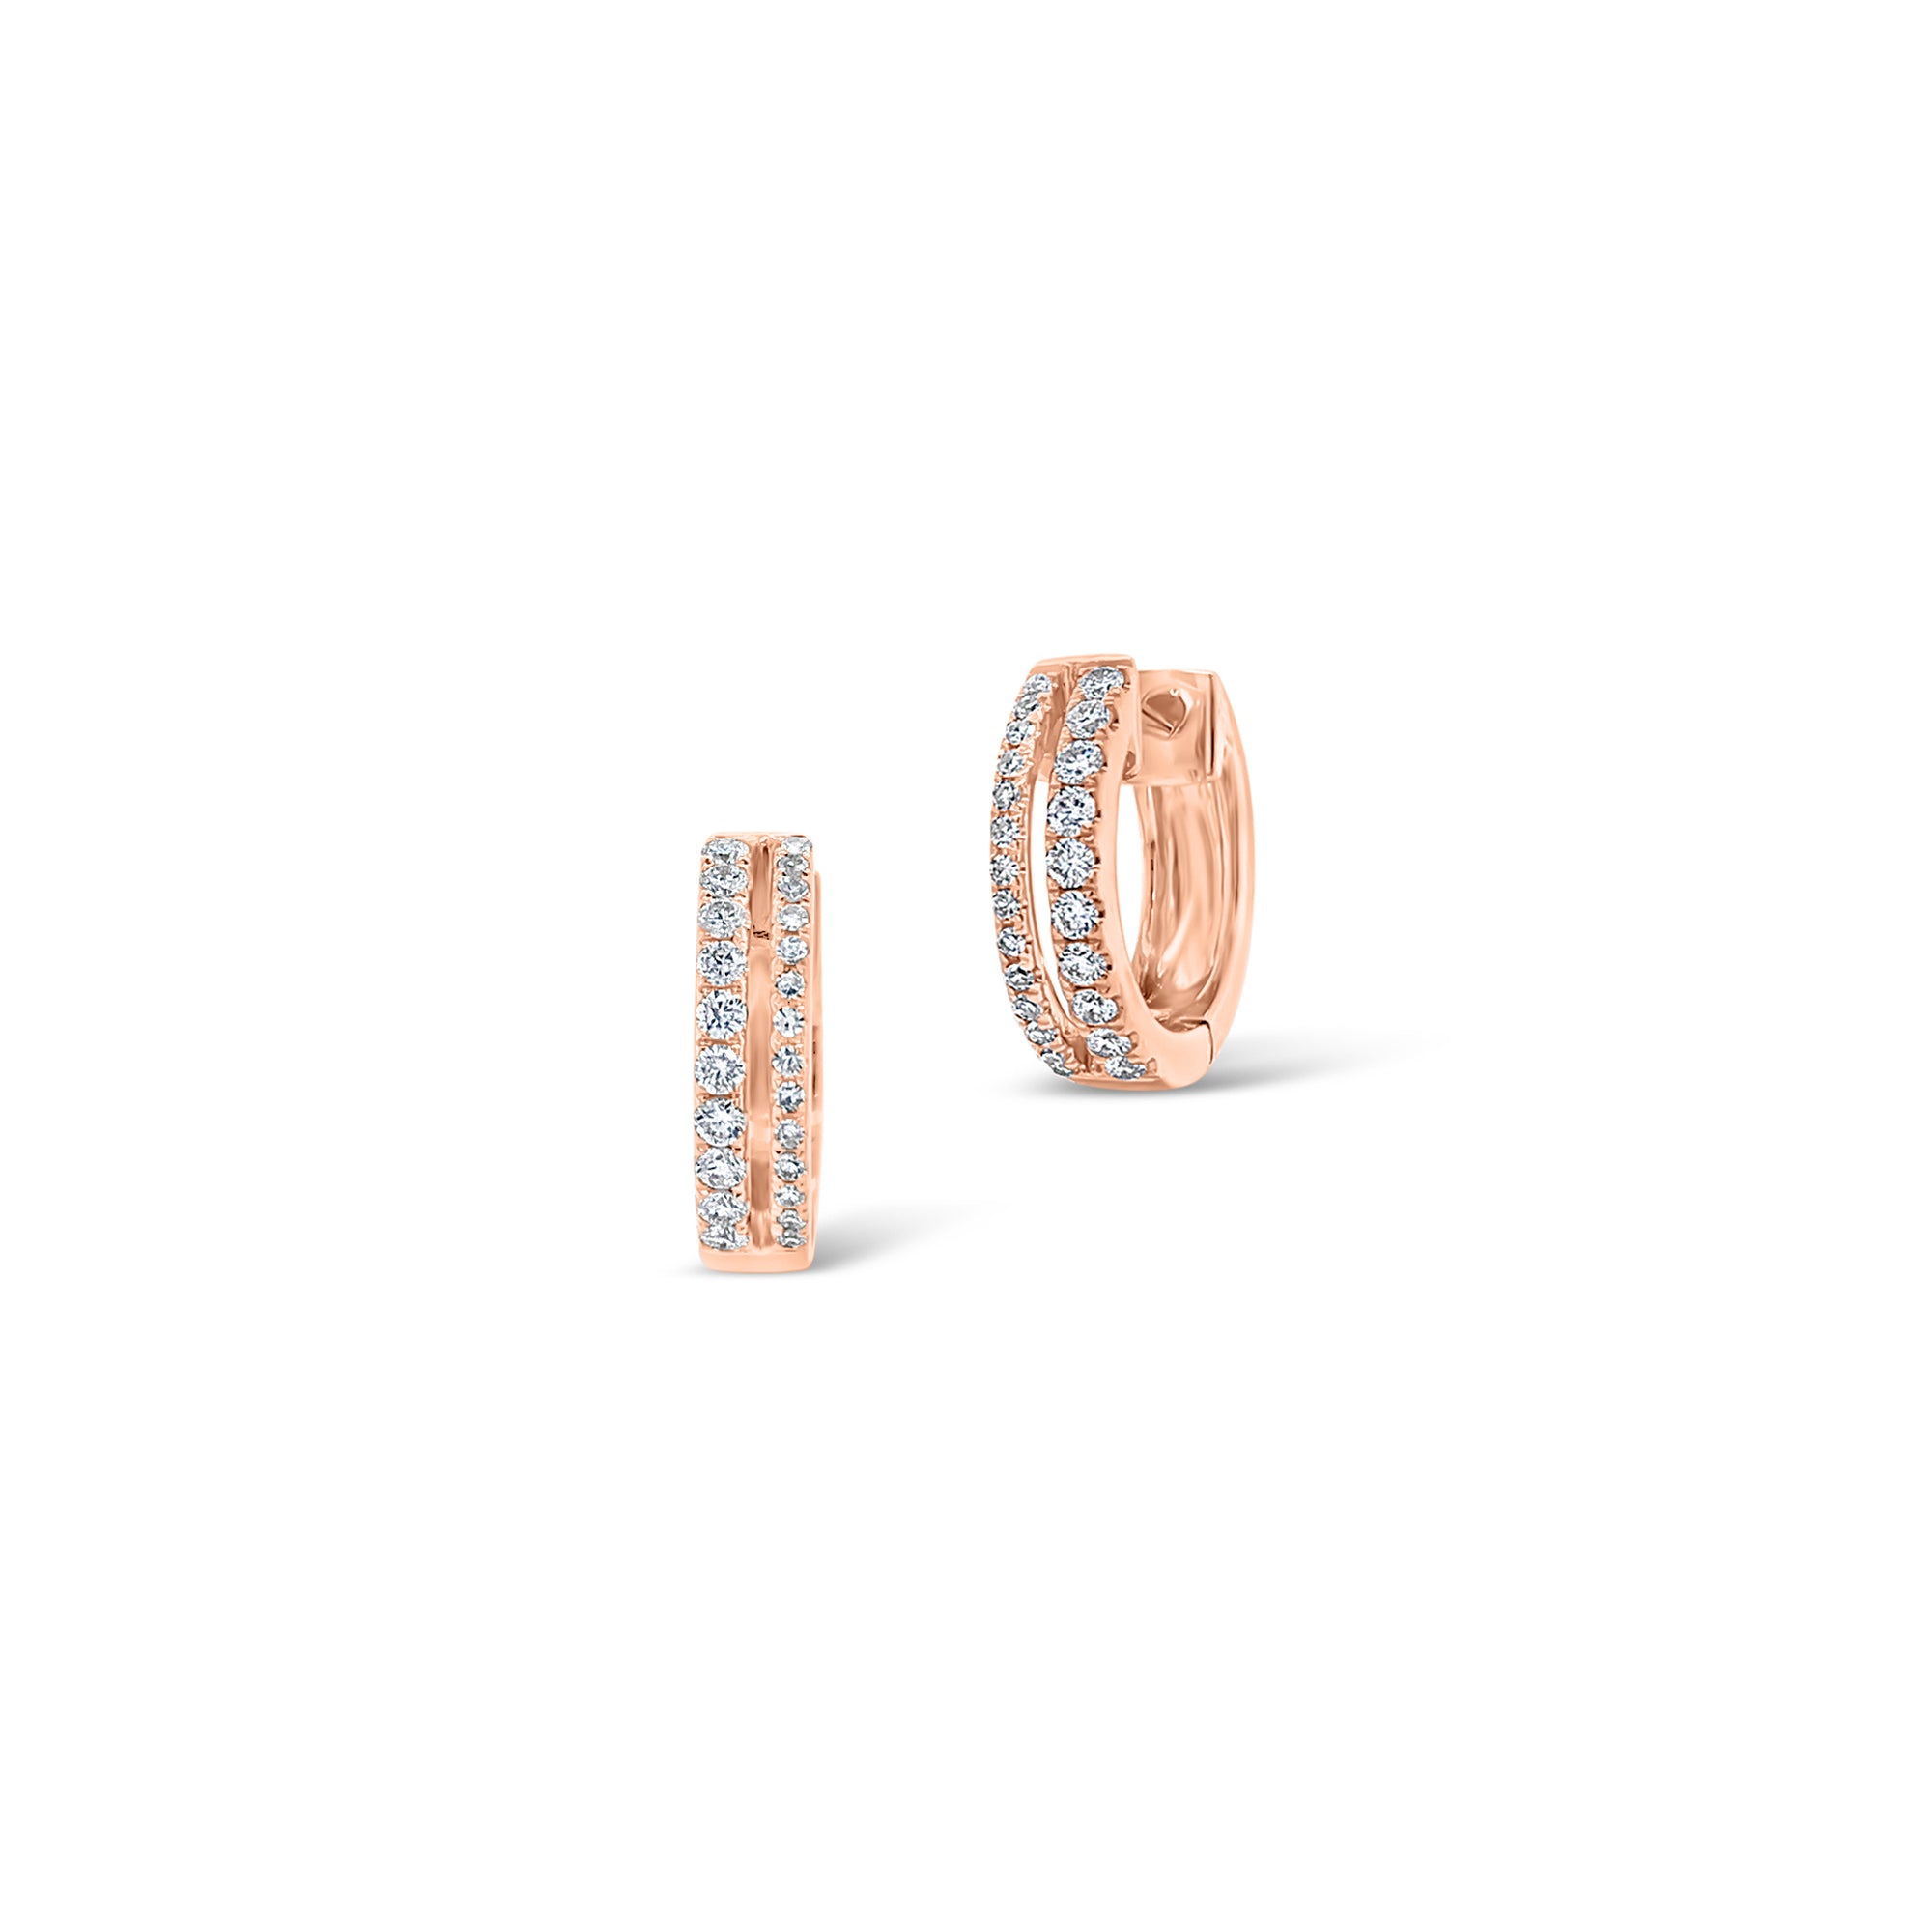 Diamond Double Row Huggie Earrings - 14K gold weighing 2.50 grams total   - 48 round diamonds weighing 0.26 carats